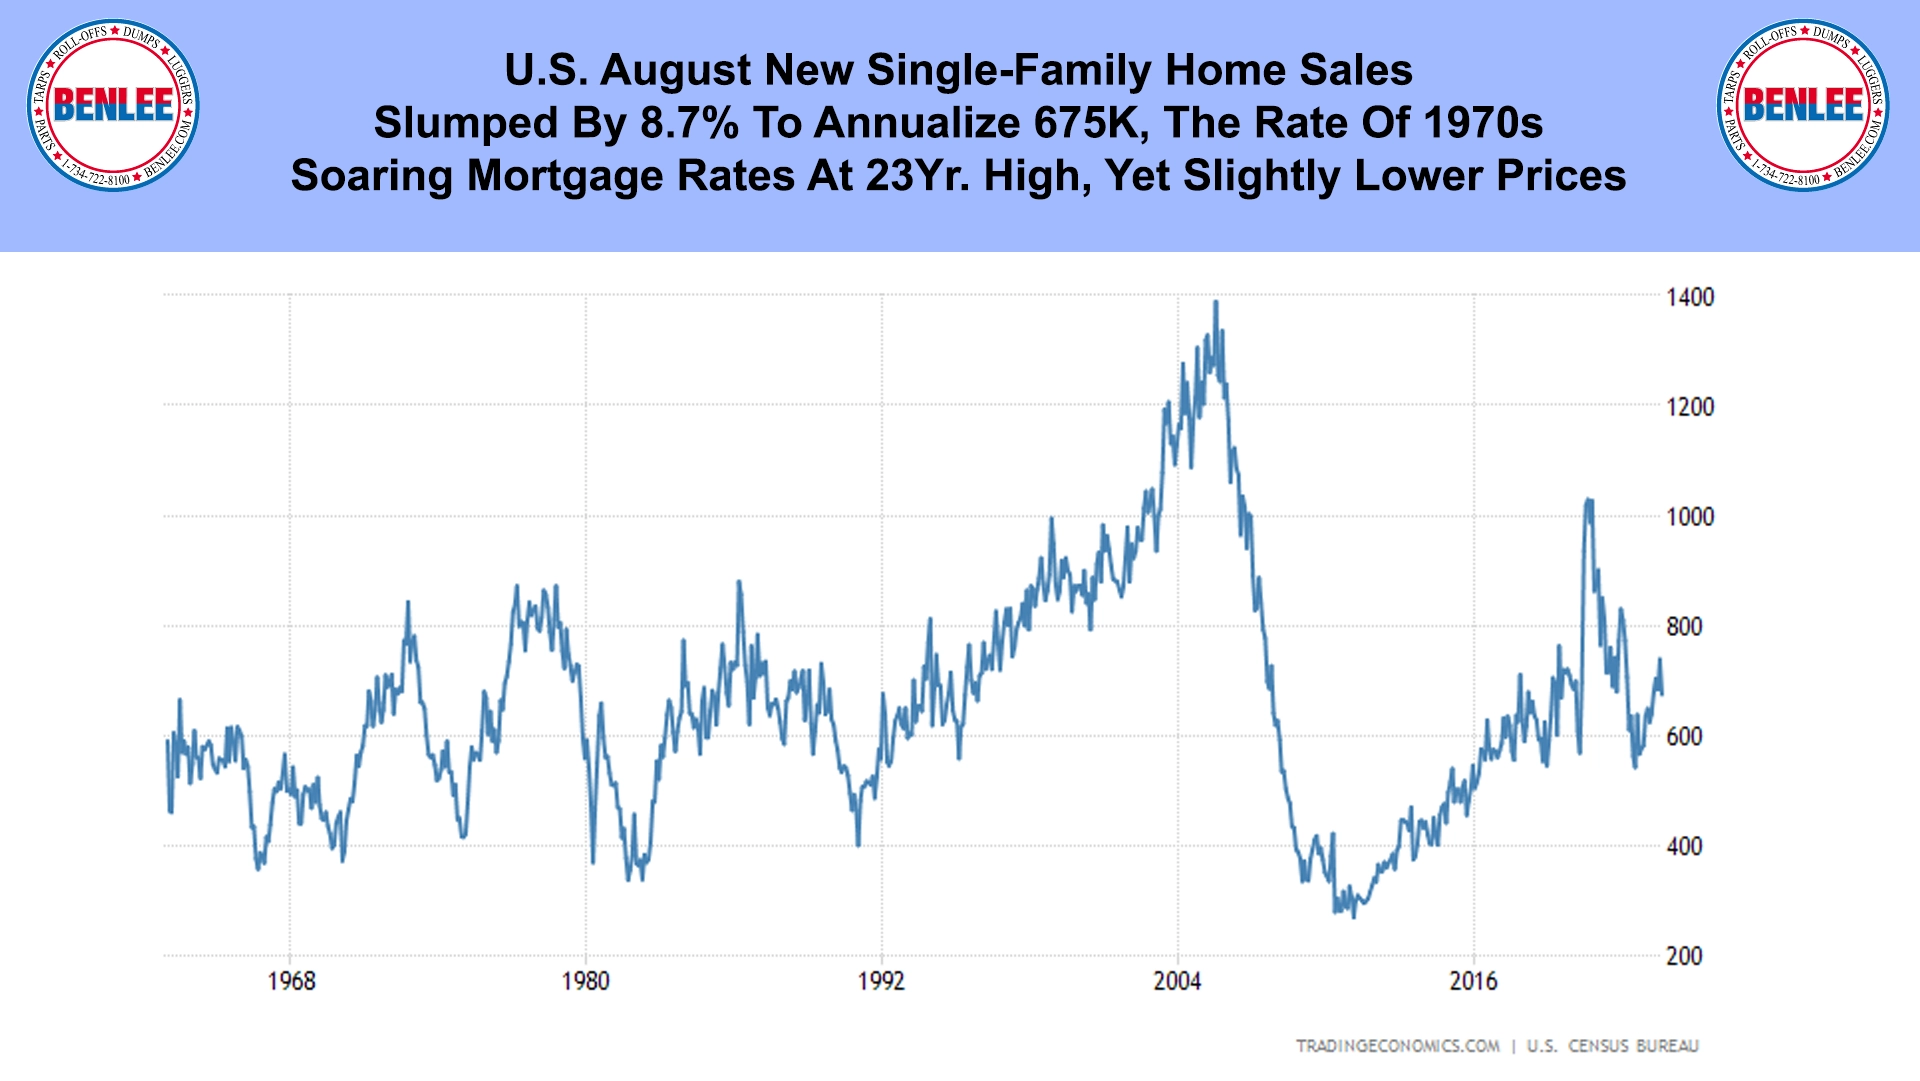 U.S. August New Single-Family Home Sales